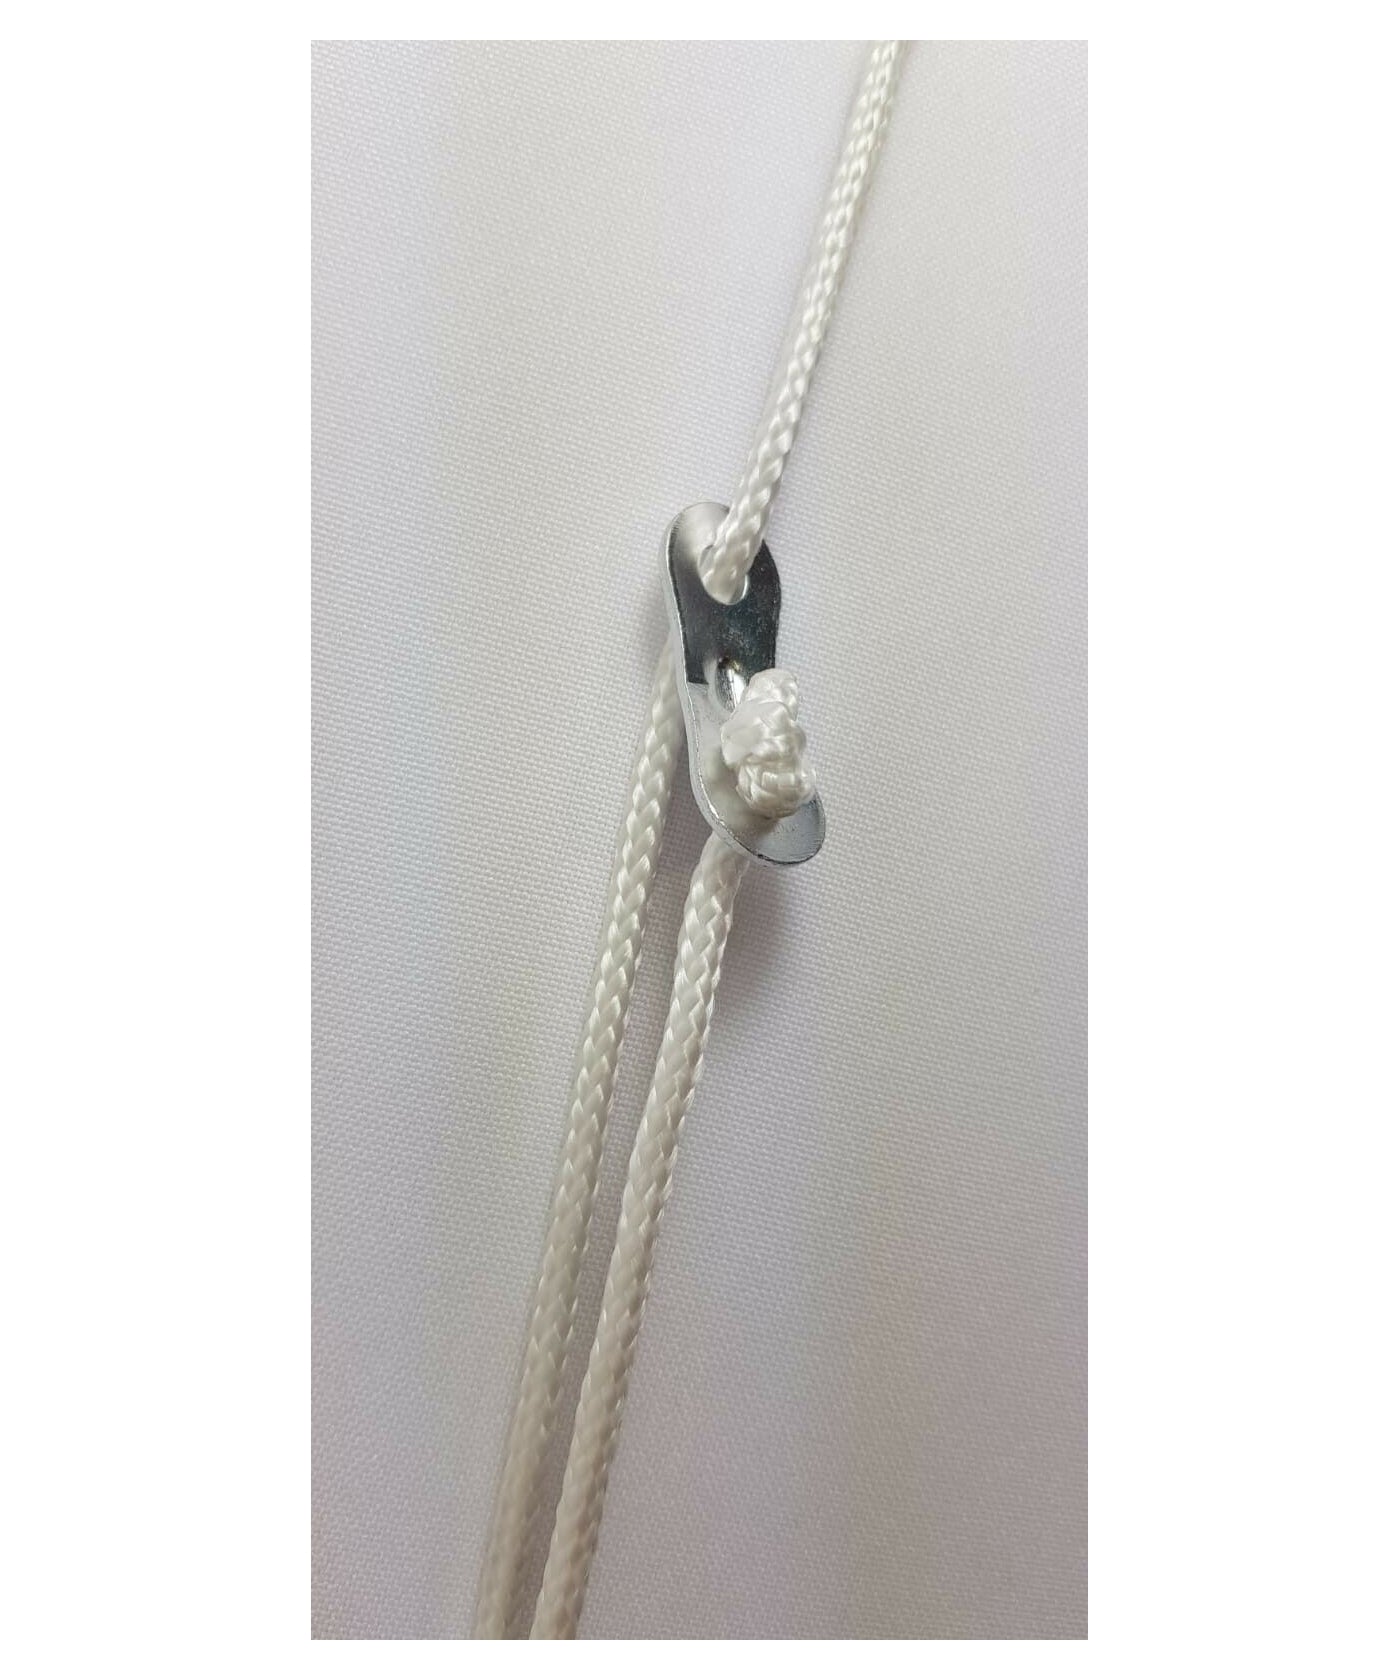 Adjustable Cord Set for Hanging Poultry Feeders & Drinkers